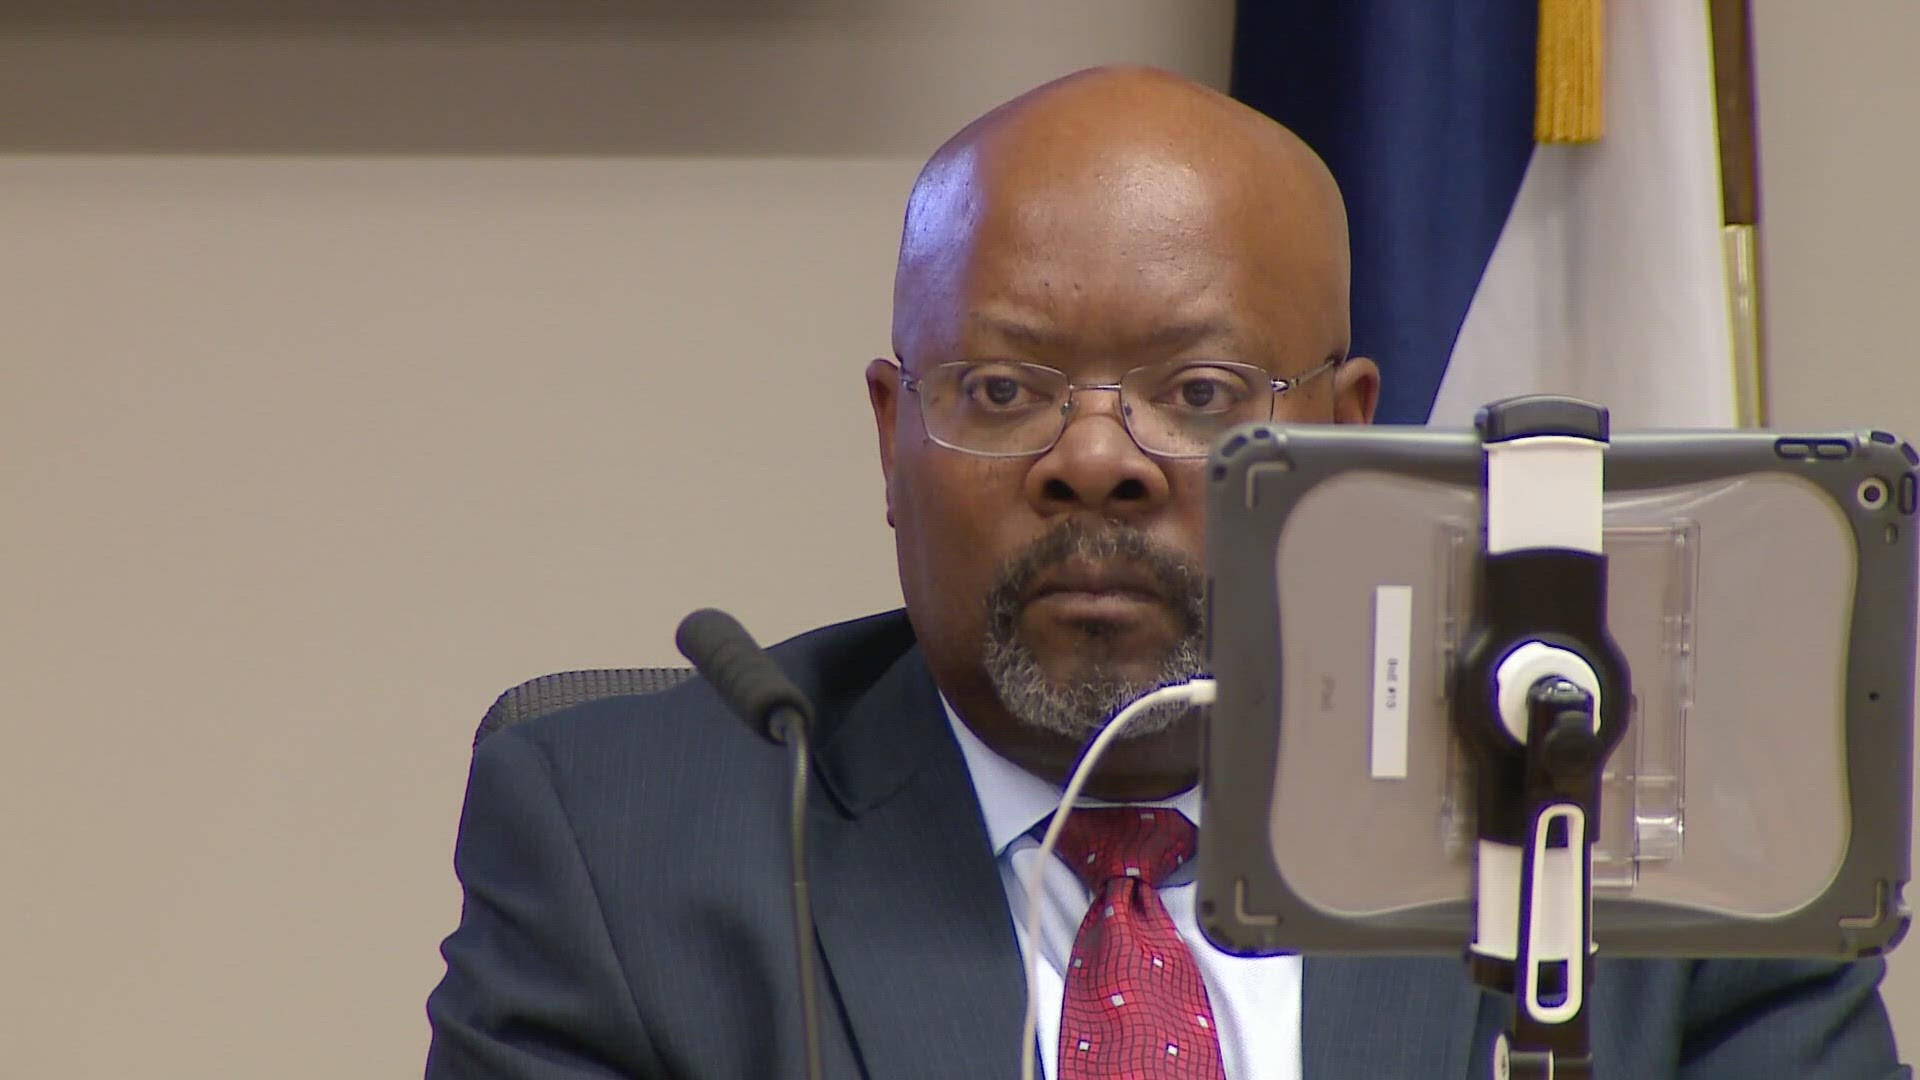 Now-former superintendent Rico Munn said board members thought he was "not black enough." A district-hired investigator concurred.